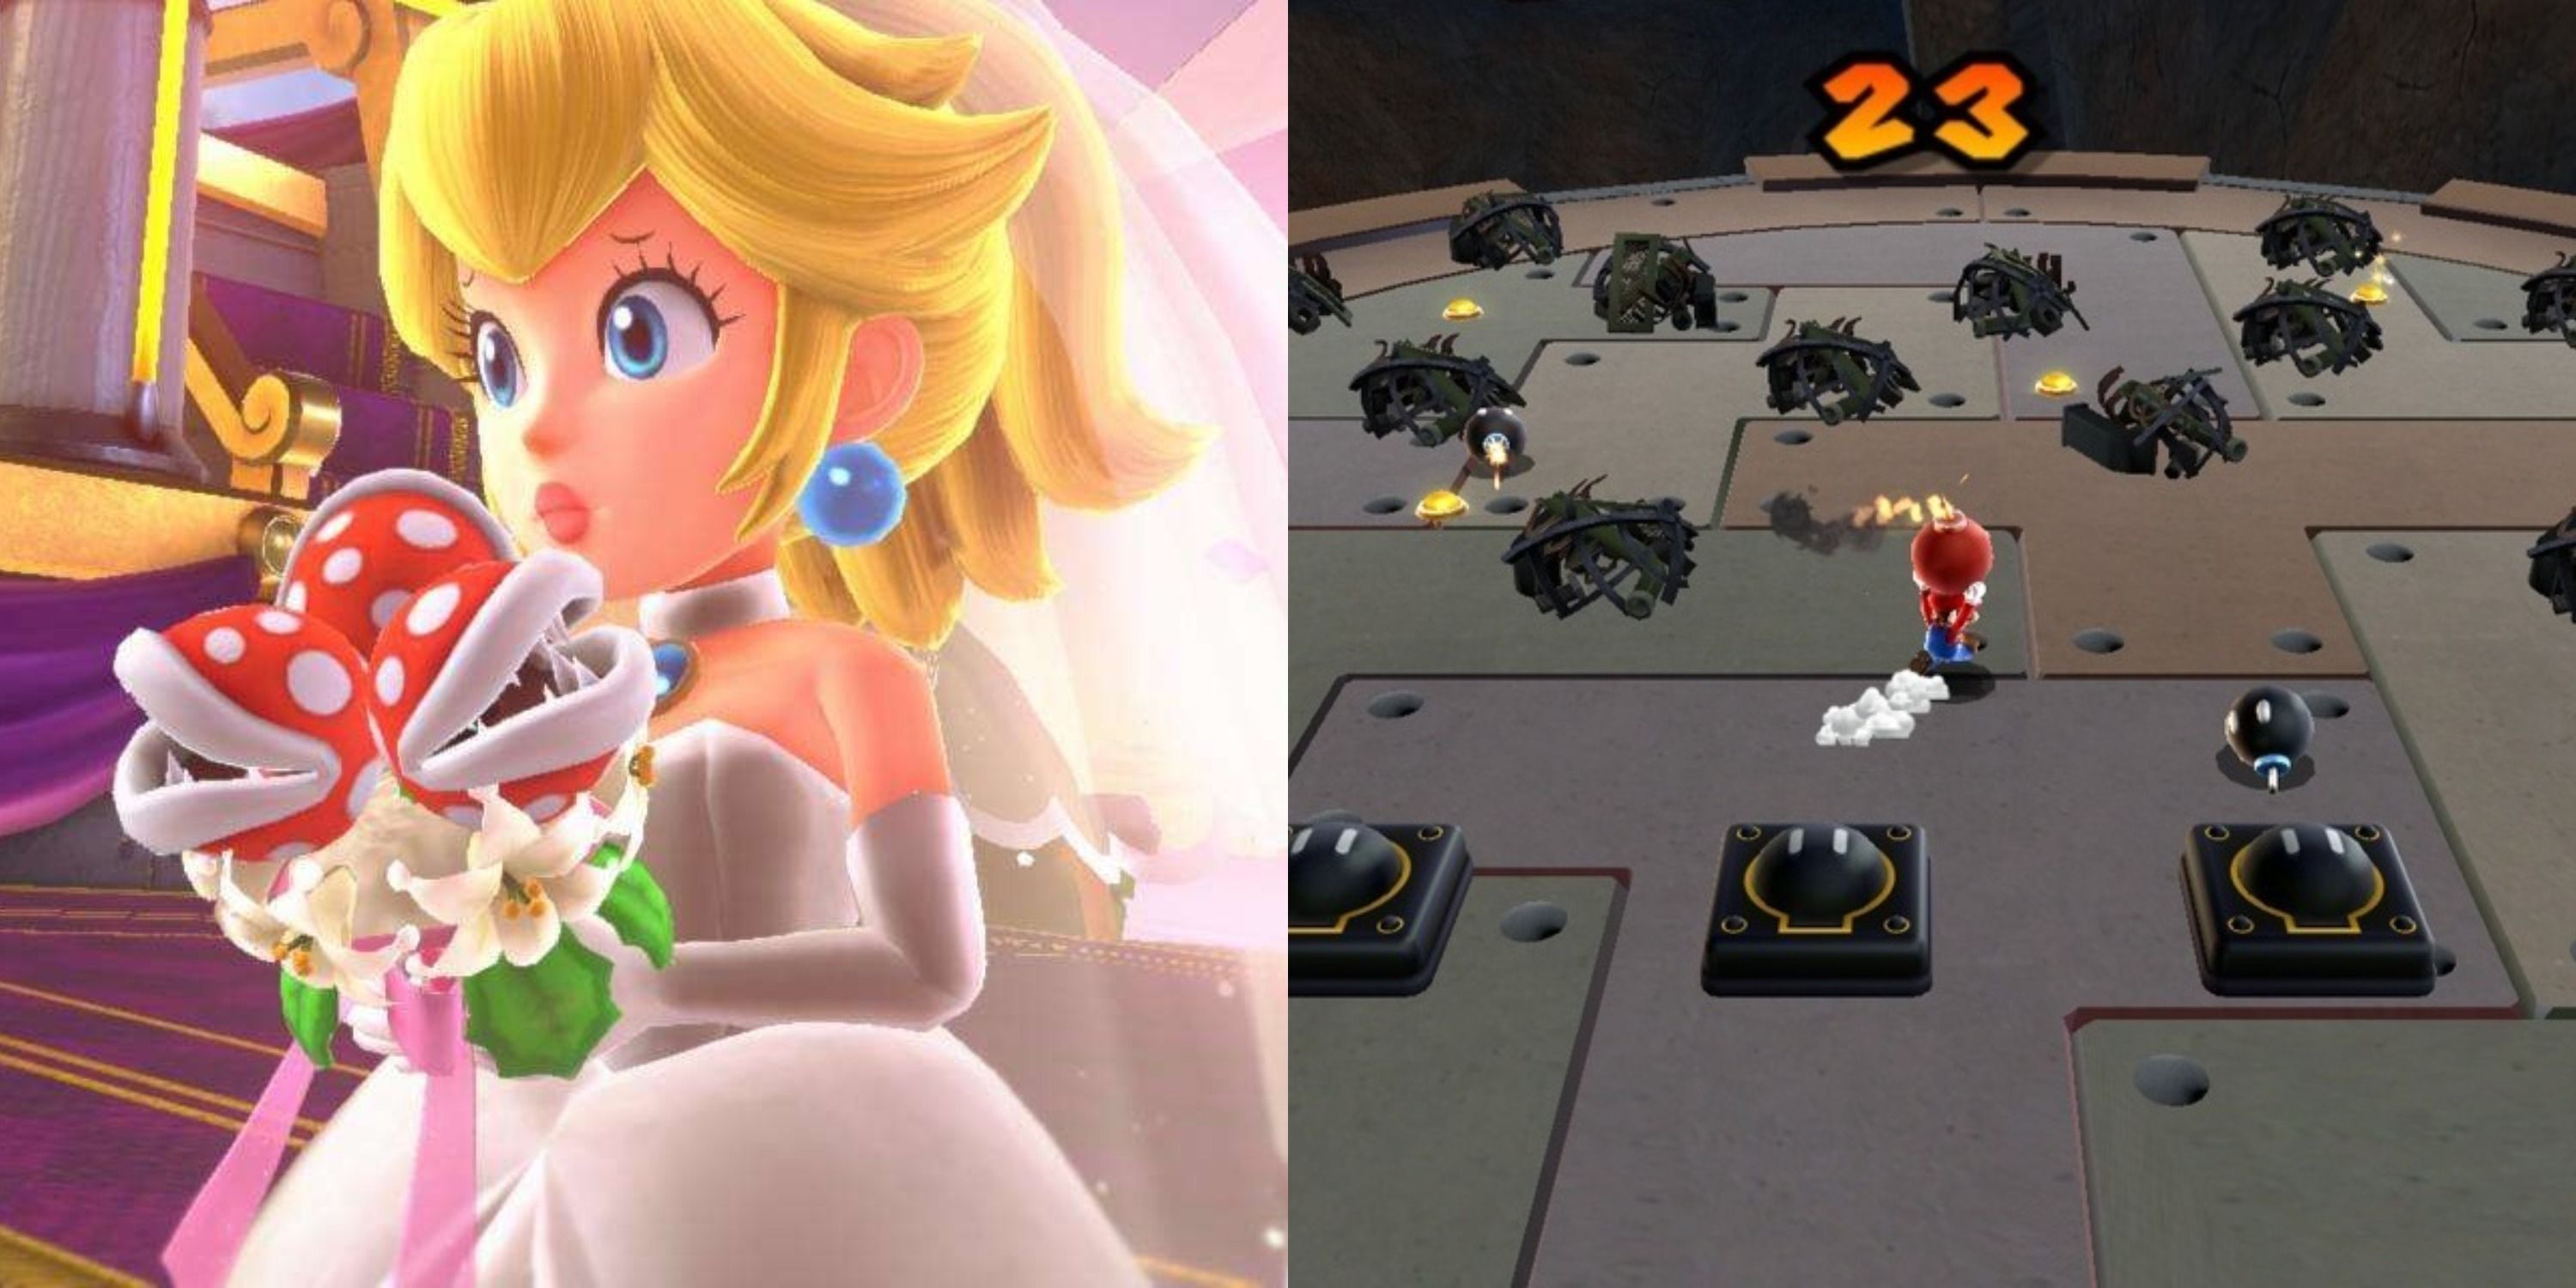 Featured image Princess Peach and Mario in a Bob-omb minigame